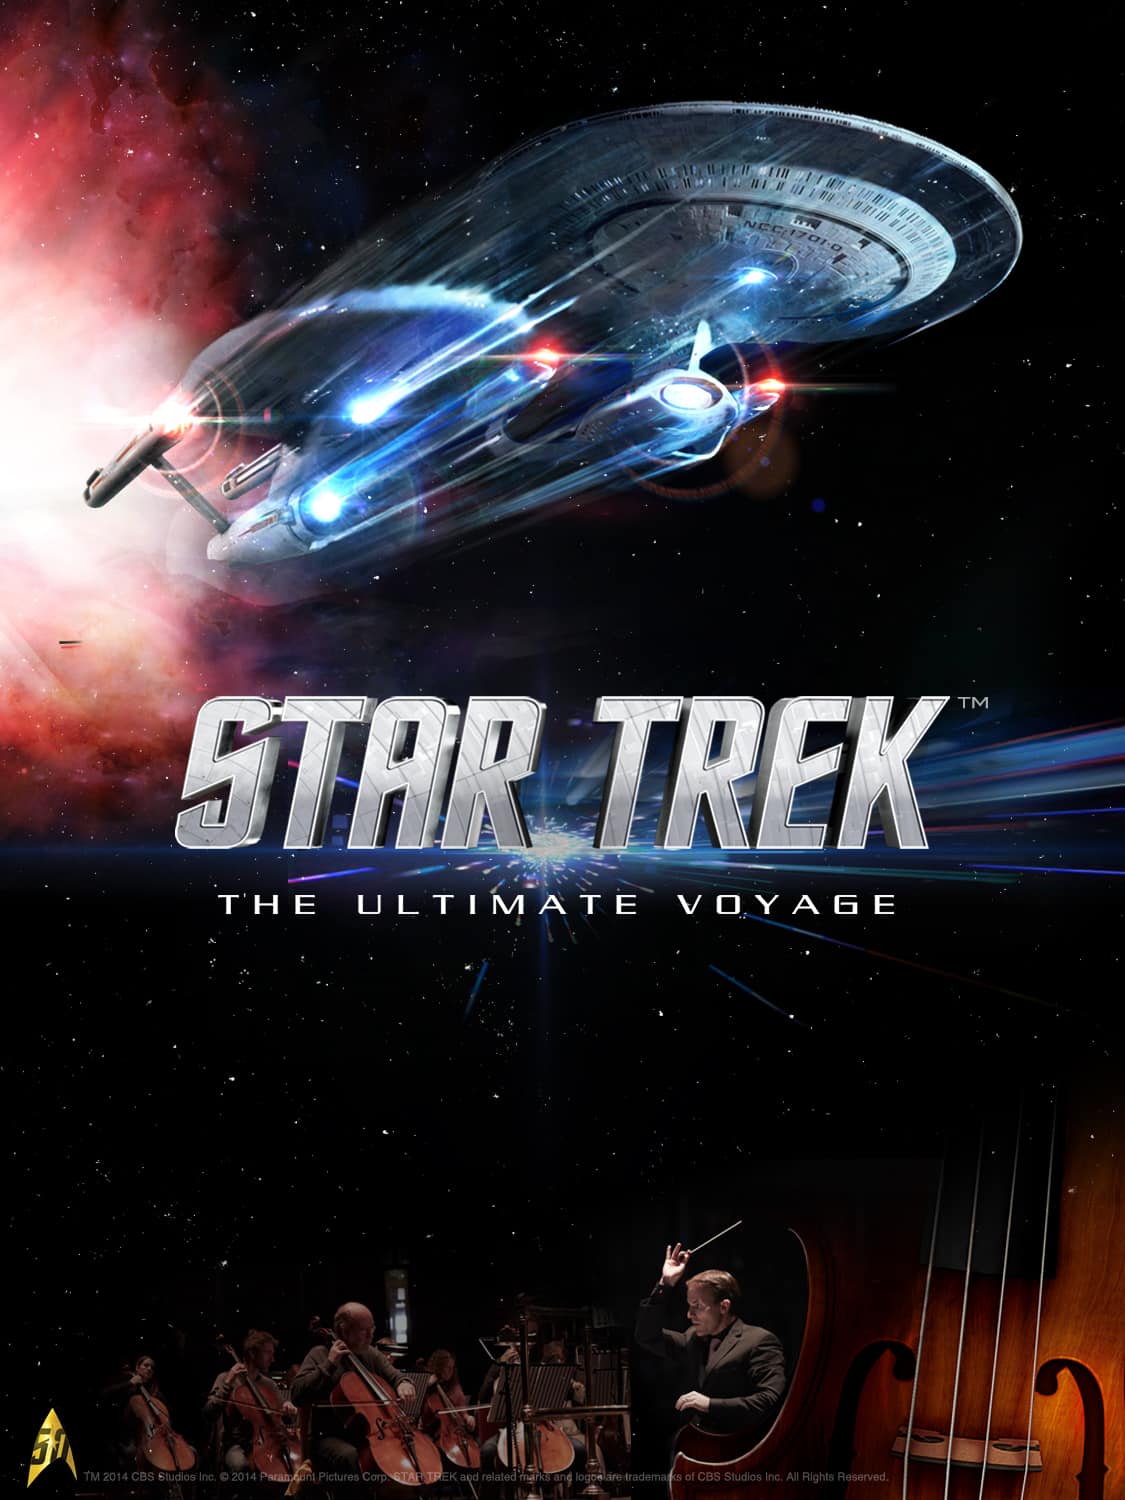 Live event brings five decades of Star Trek to concert halls for the